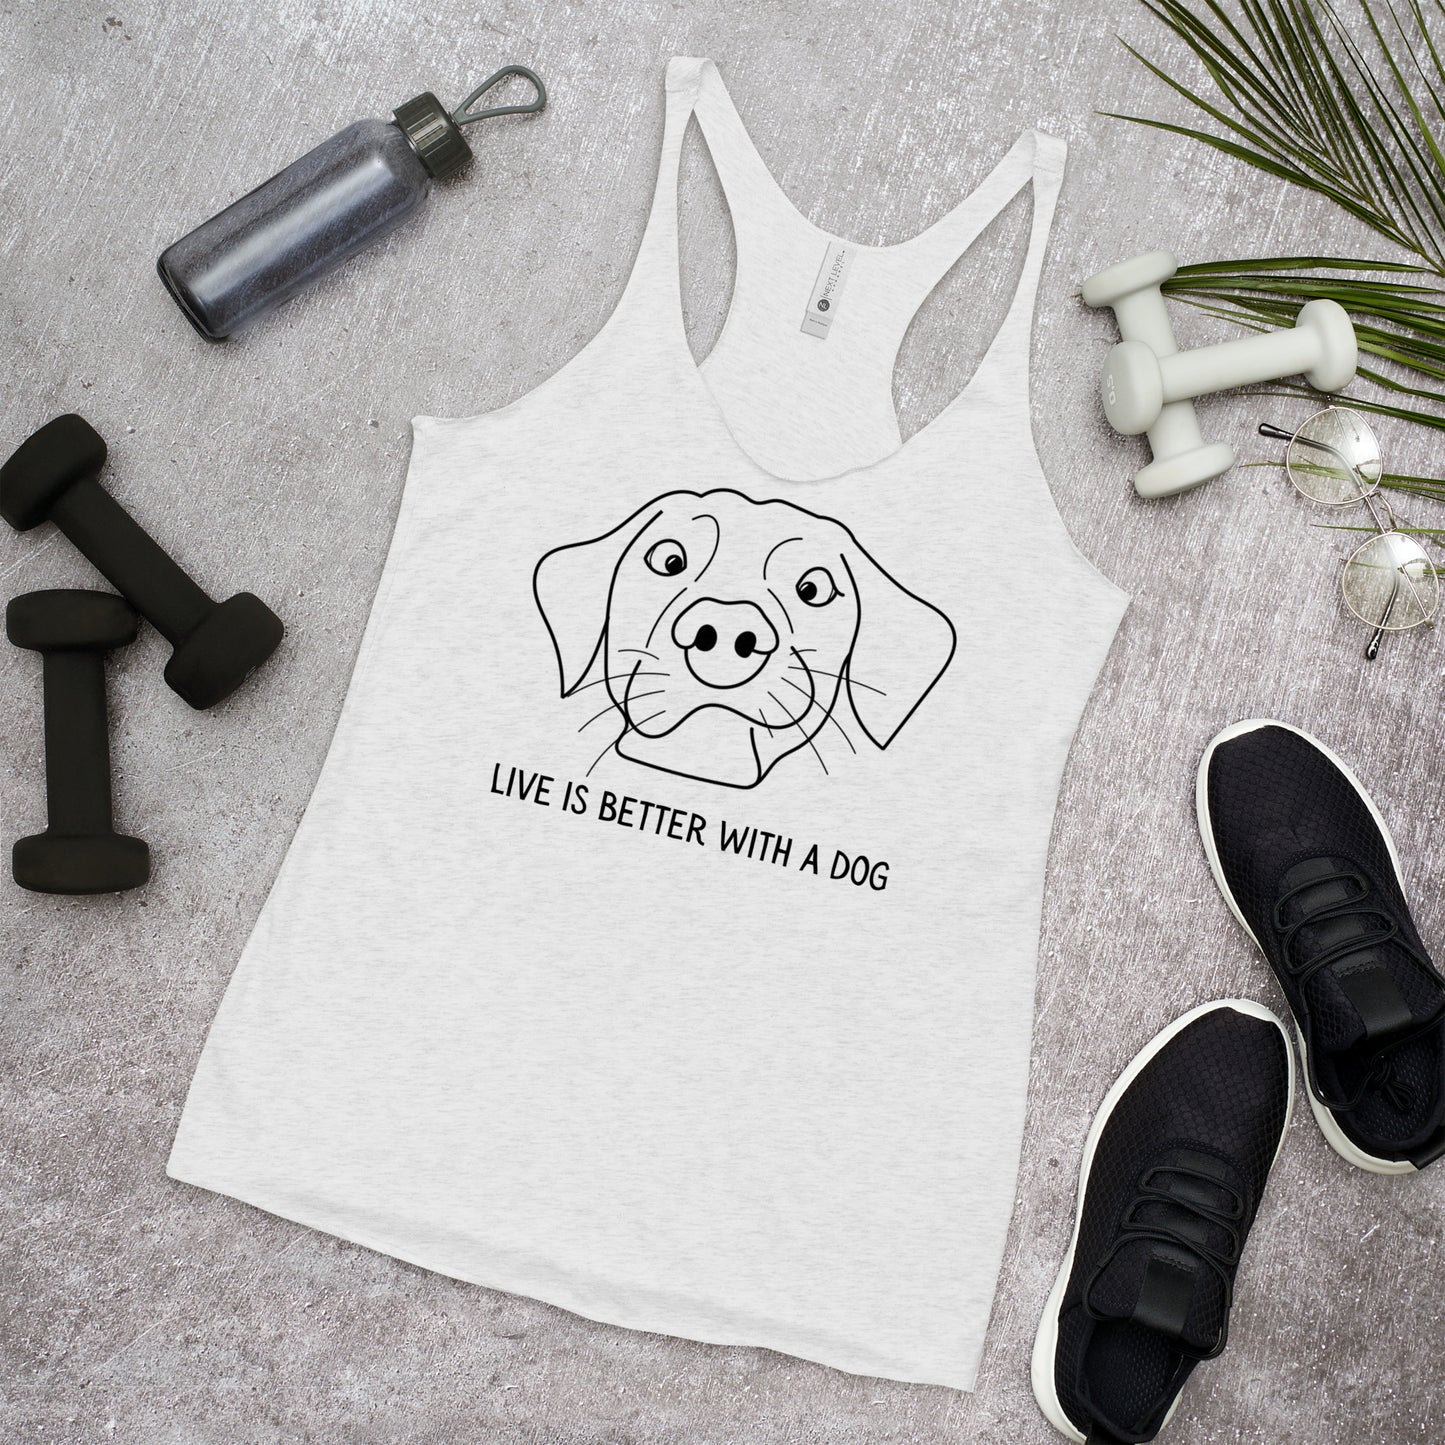 Life is better with dogs! Women's Racerback Tank